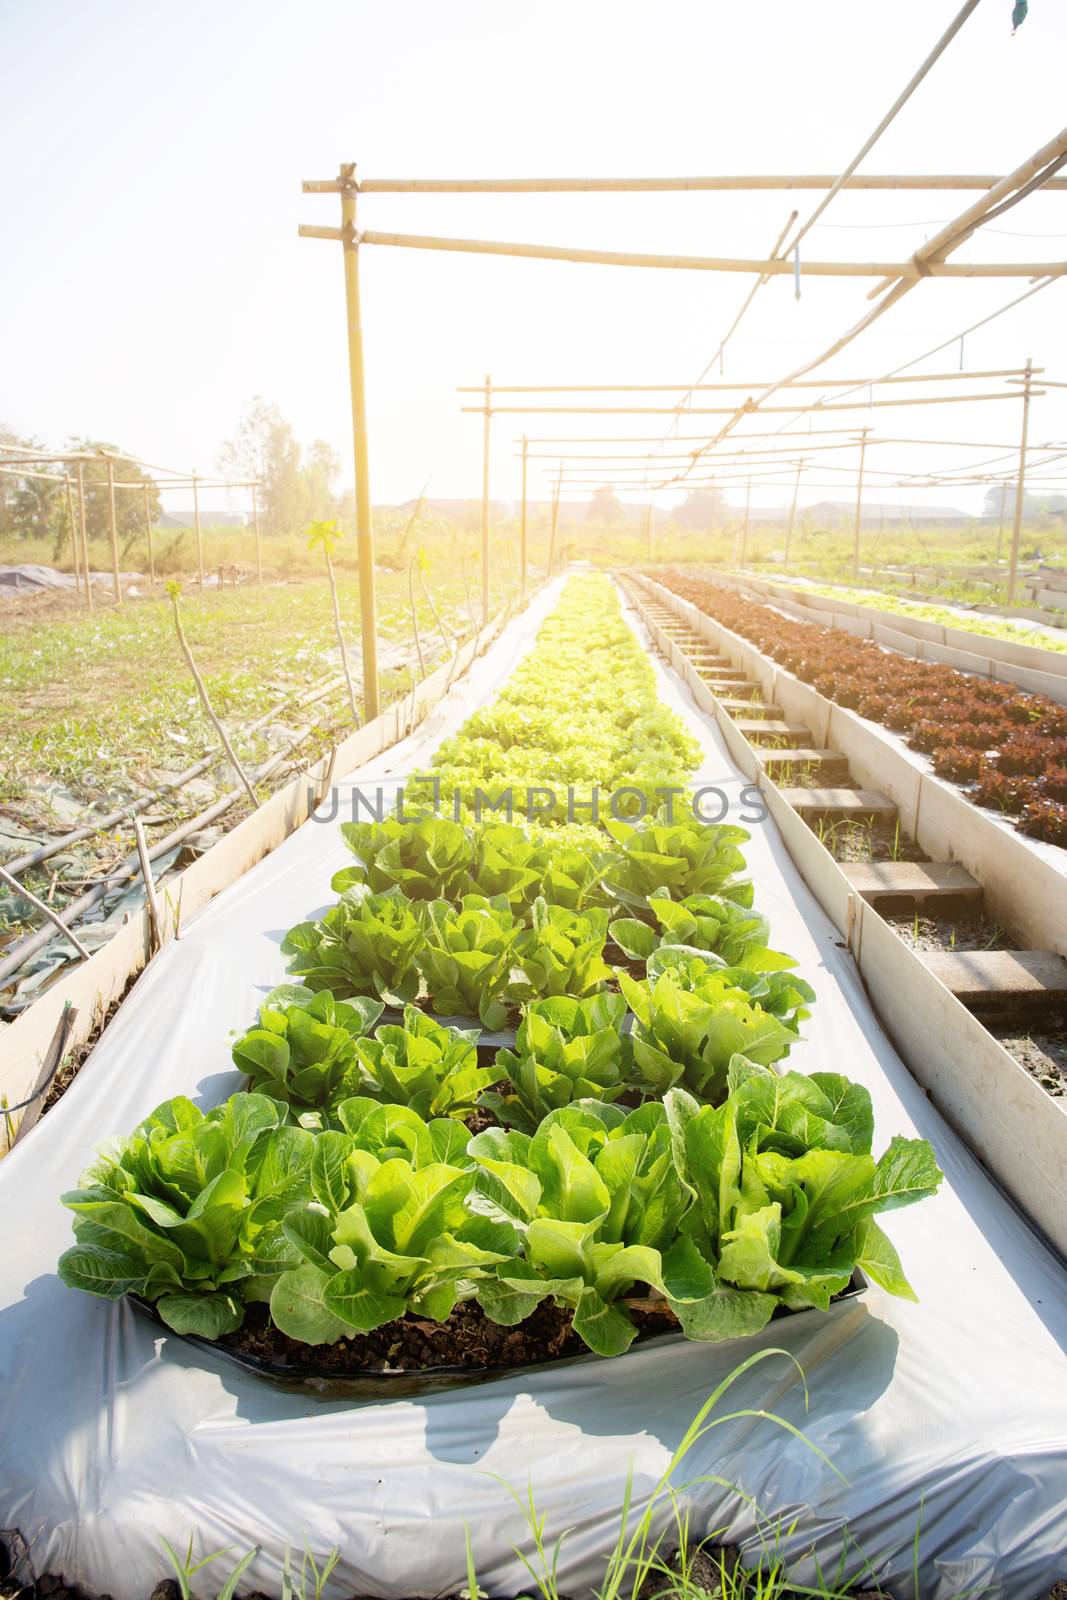 Fresh sapling of green​ oak or red oak romaine lettuce organic farm in plantation, produce and cultivation agriculture and harvest green leaves in the field, vegetable and healthy food concept.